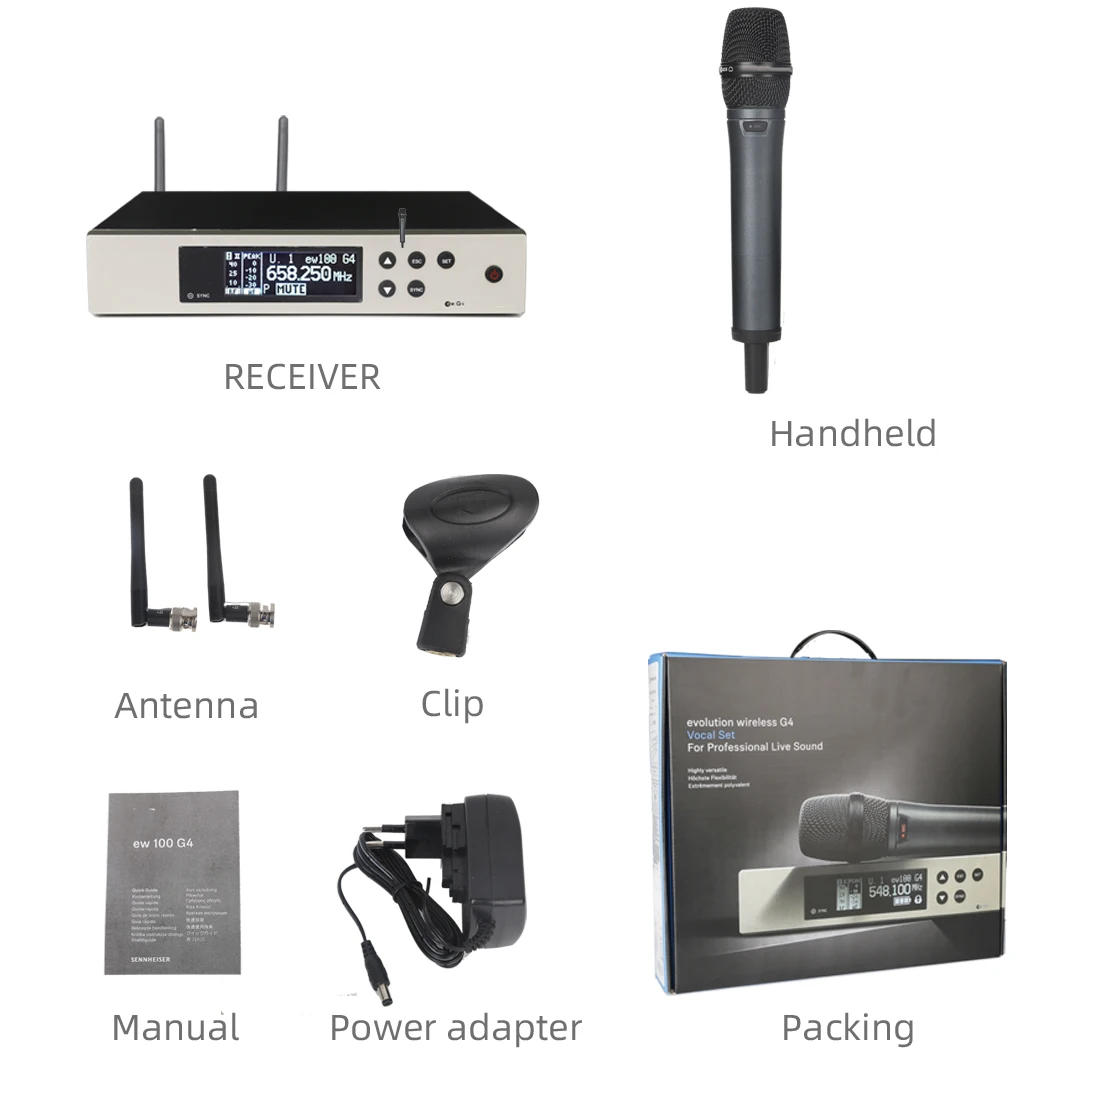 EW135G4 EW100G4 EW 100 G4 wireless microphone system with E835S haneheld microphone professional UHF  microphone EW 135 G4 images - 6